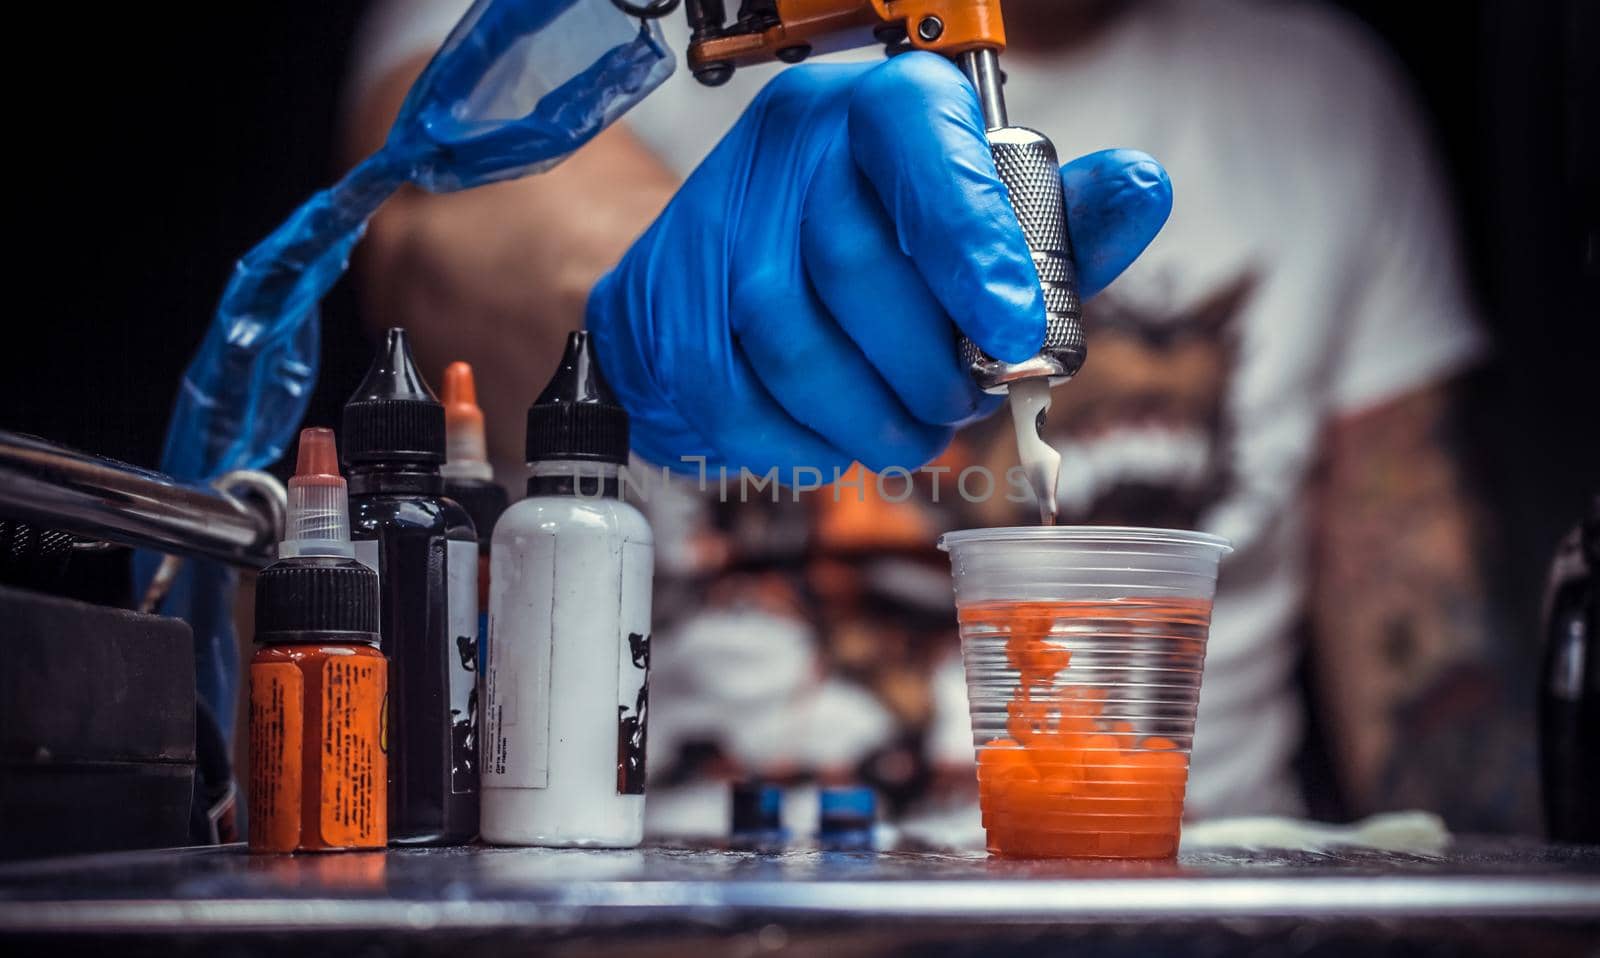 Hand of a master of the art of tattooing and a tattoo gun./Hand of a professional tattooer with a tattoo gun.